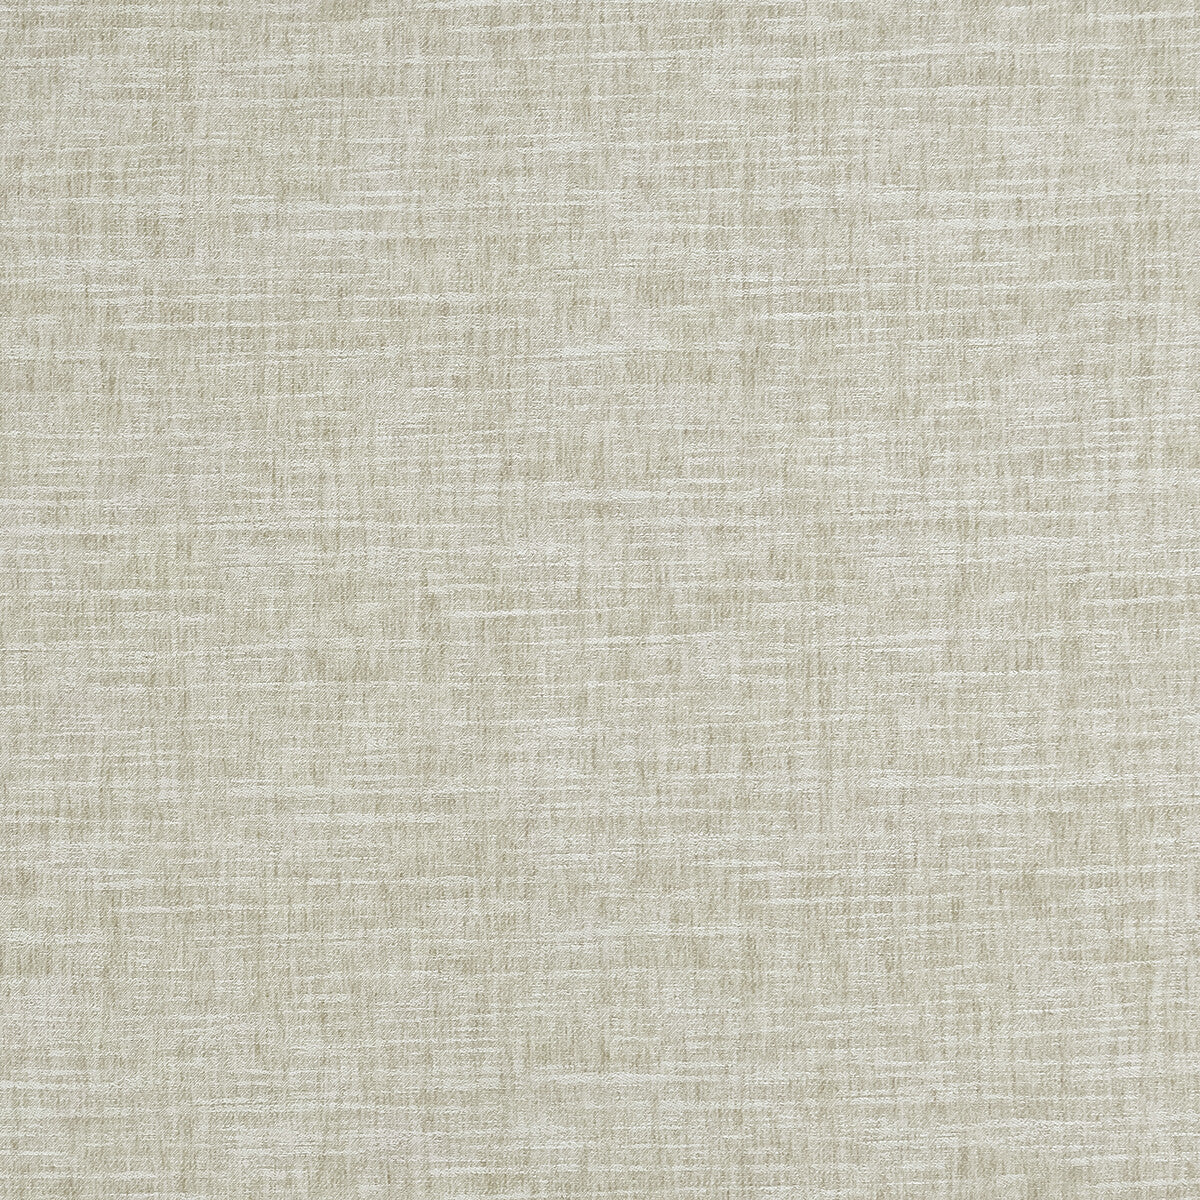 Mizo fabric in ivory/linen color - pattern F1444/02.CAC.0 - by Clarke And Clarke in the Clarke &amp; Clarke Origins collection